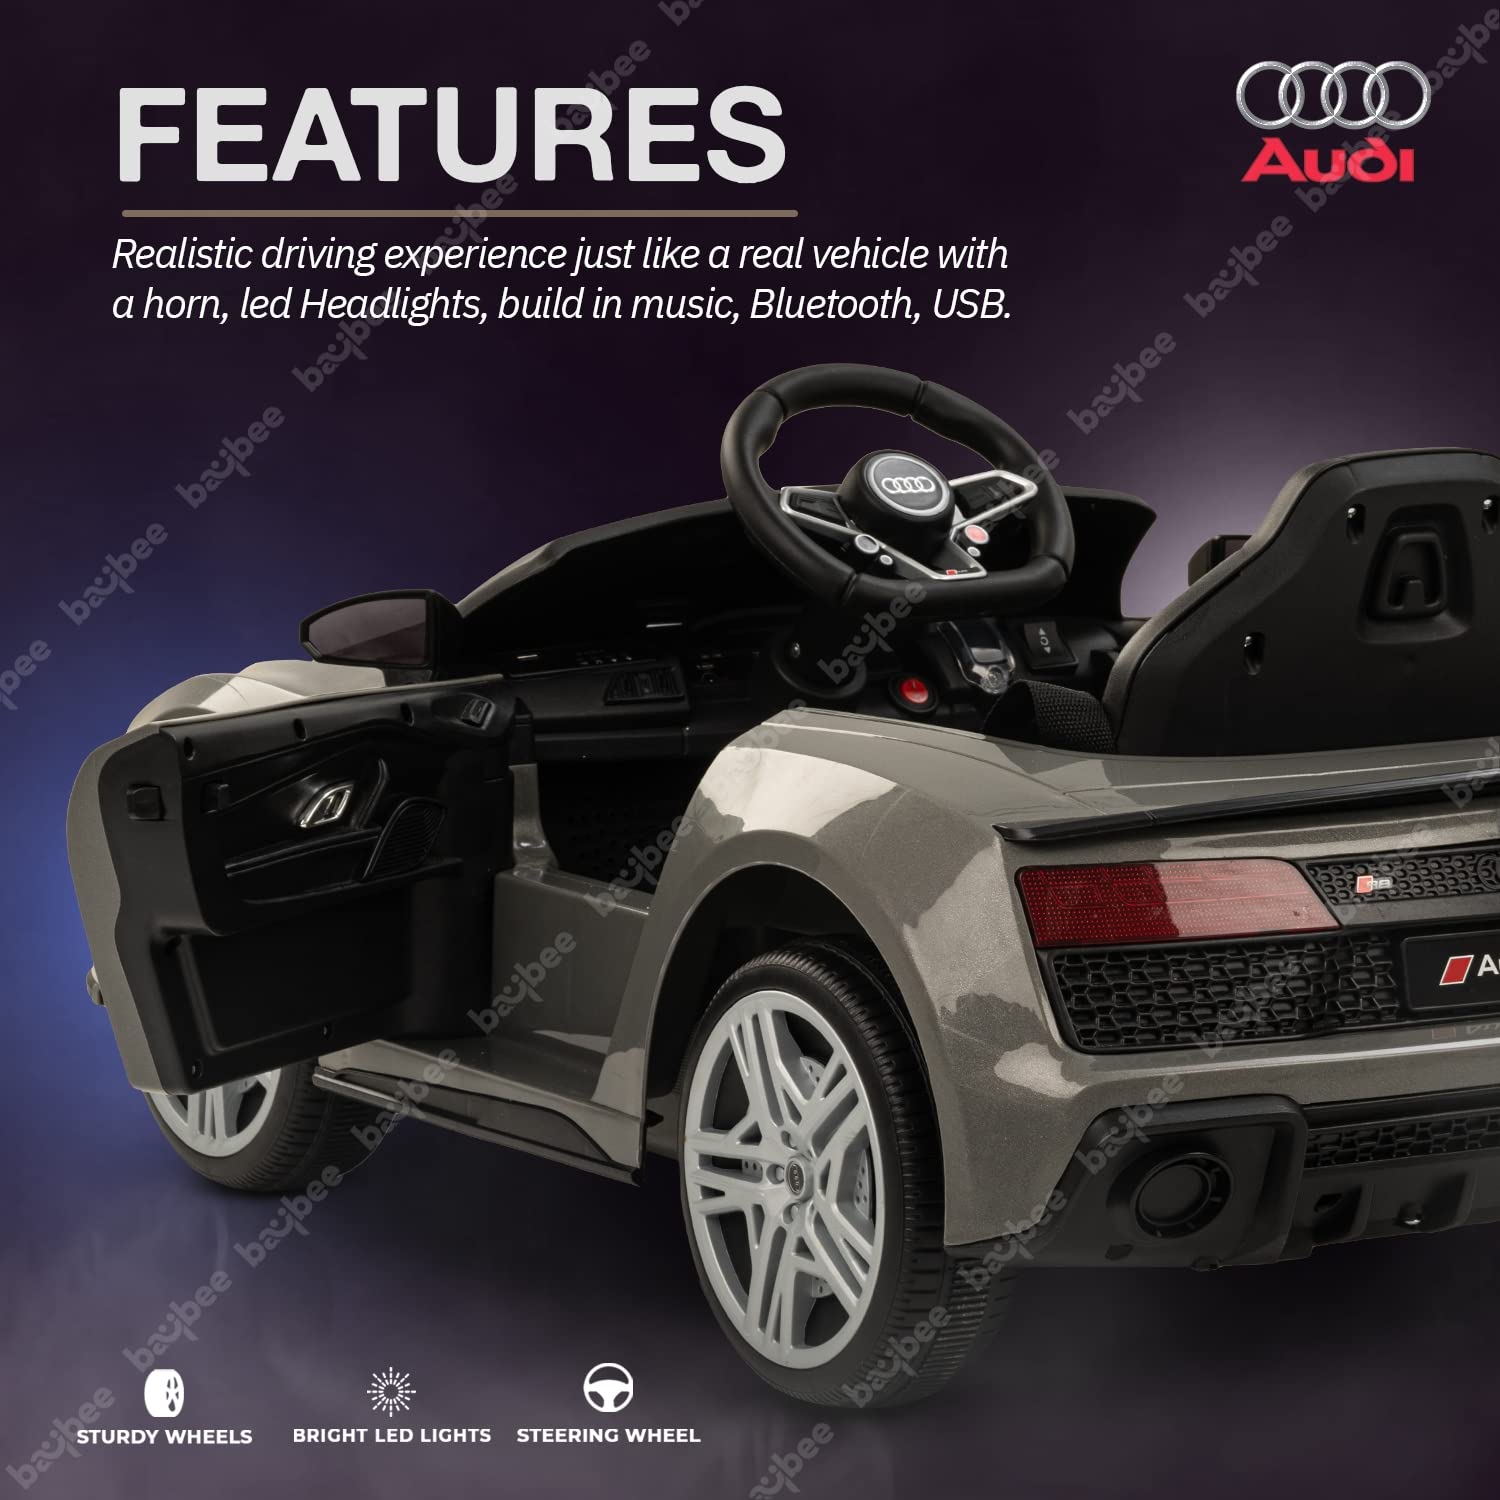 Audi R8 Official Licensed Kids Electric Rideon Car Age 1-5 Years (Metallic Grey)